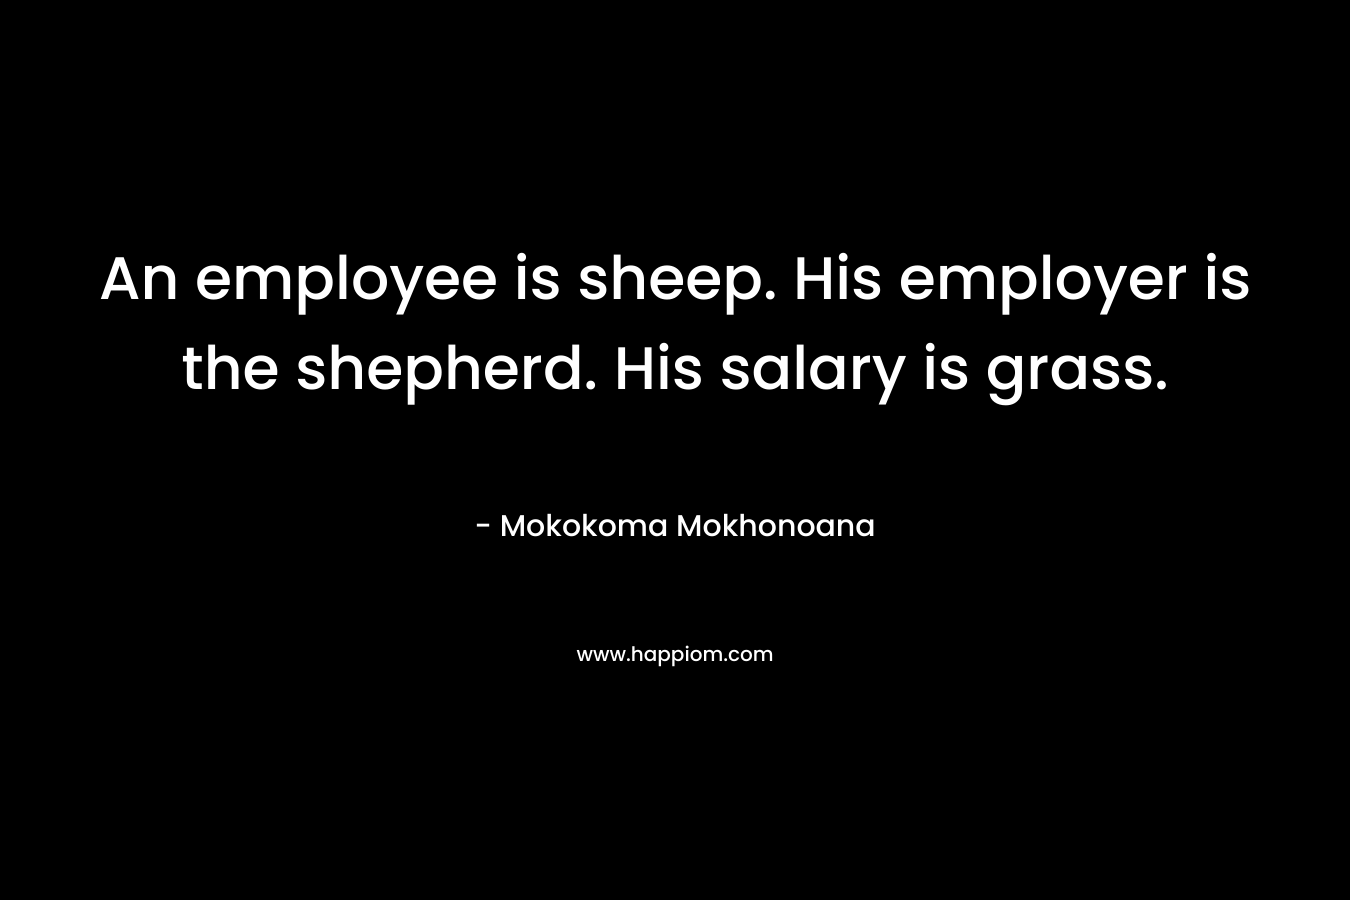 An employee is sheep. His employer is the shepherd. His salary is grass.